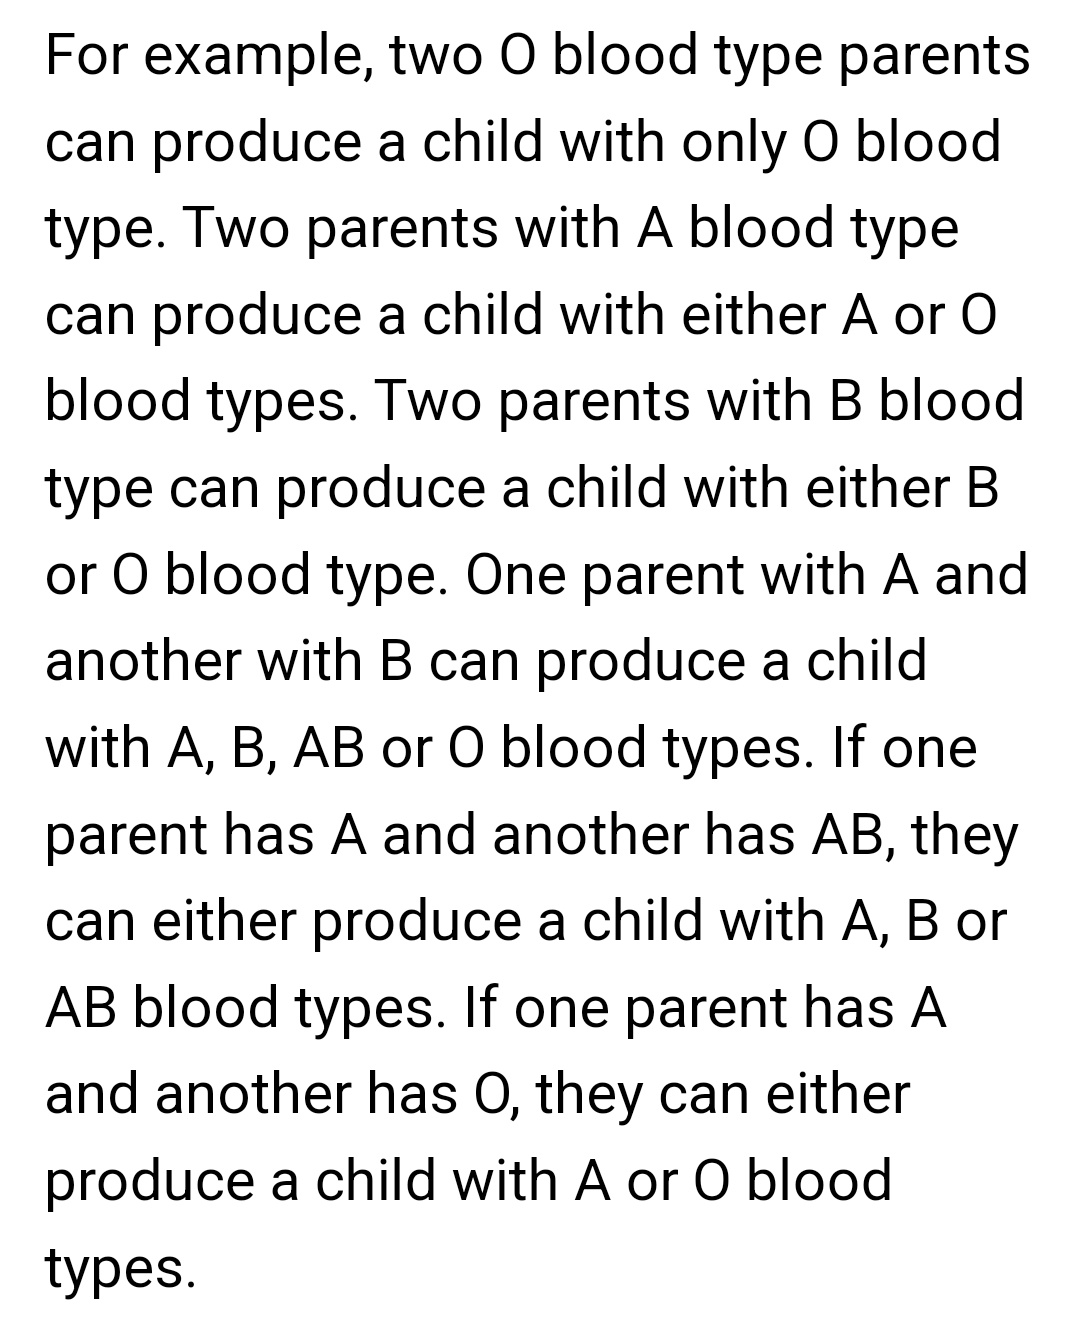 Does a child usually have the same blood type as one of their